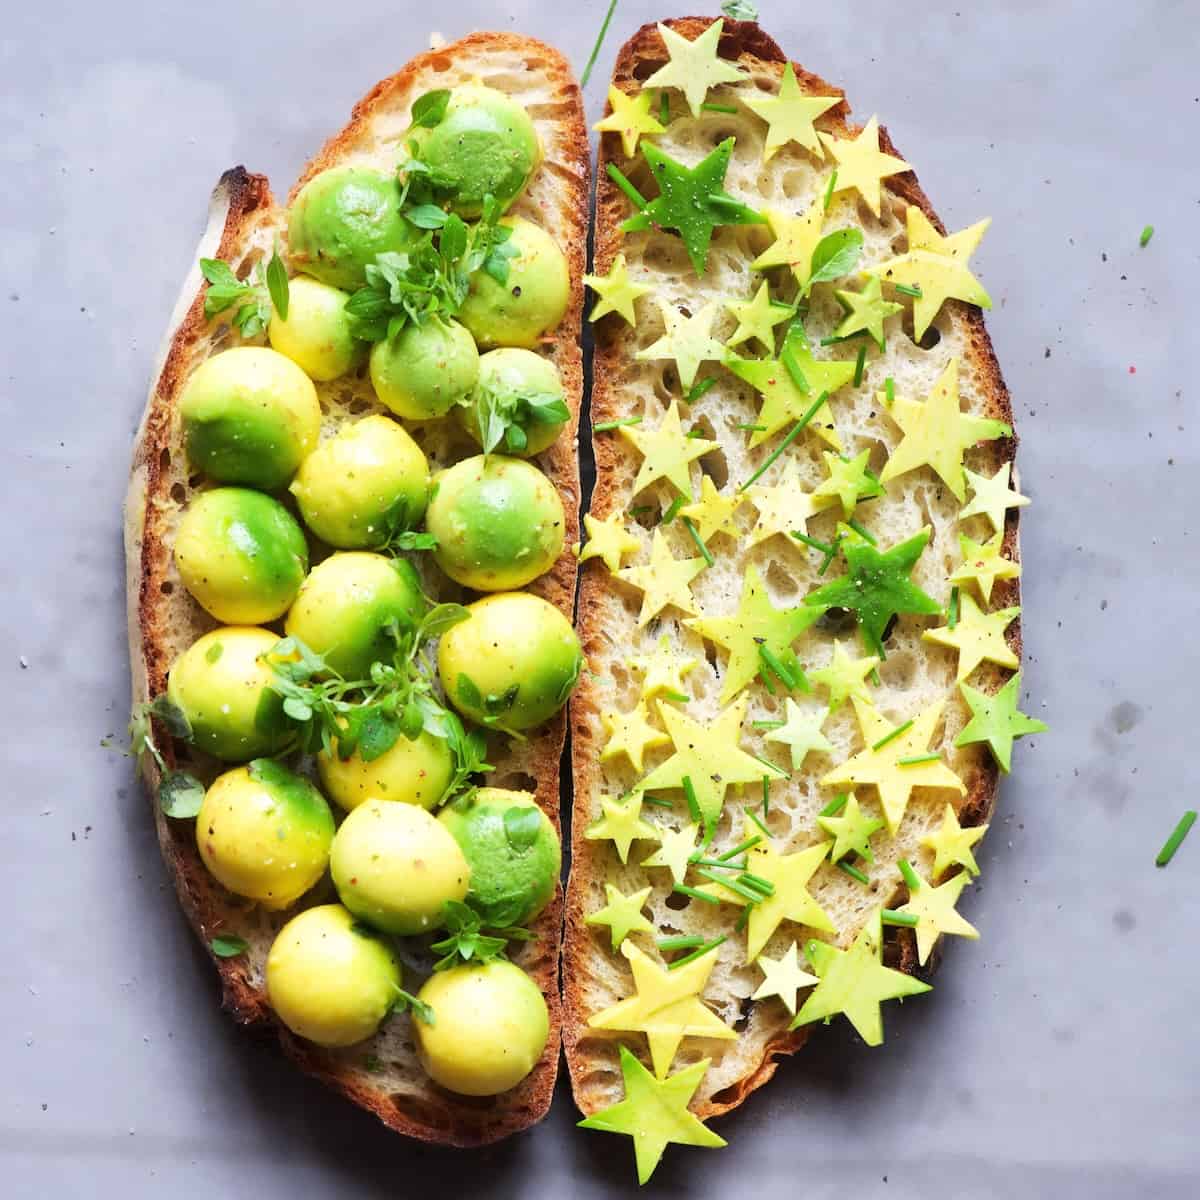 Two slices of bread with avocado on top